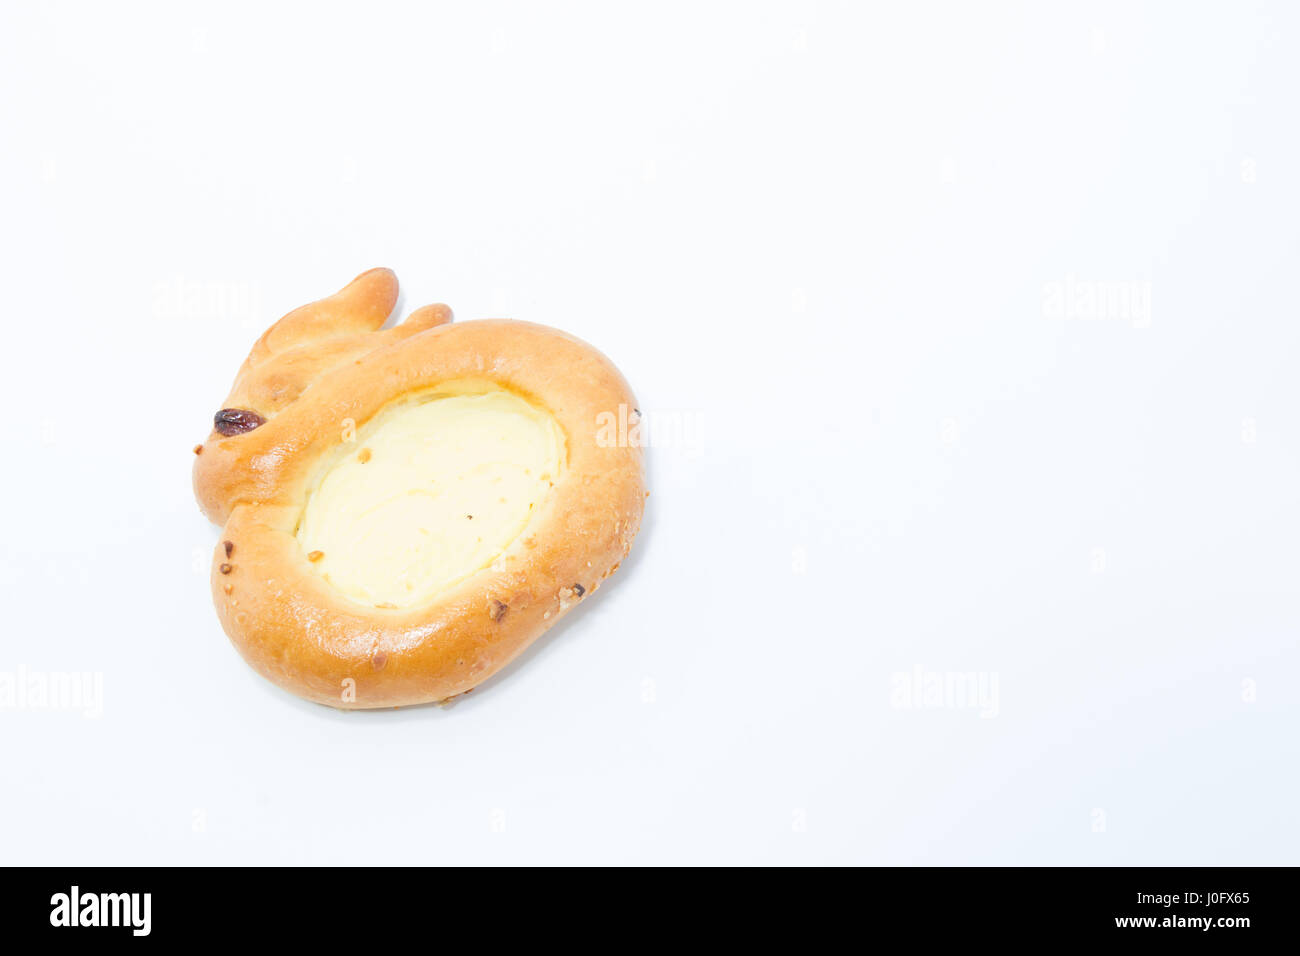 Easter bunny egg tart pastry round and yellow isolated in white background Stock Photo